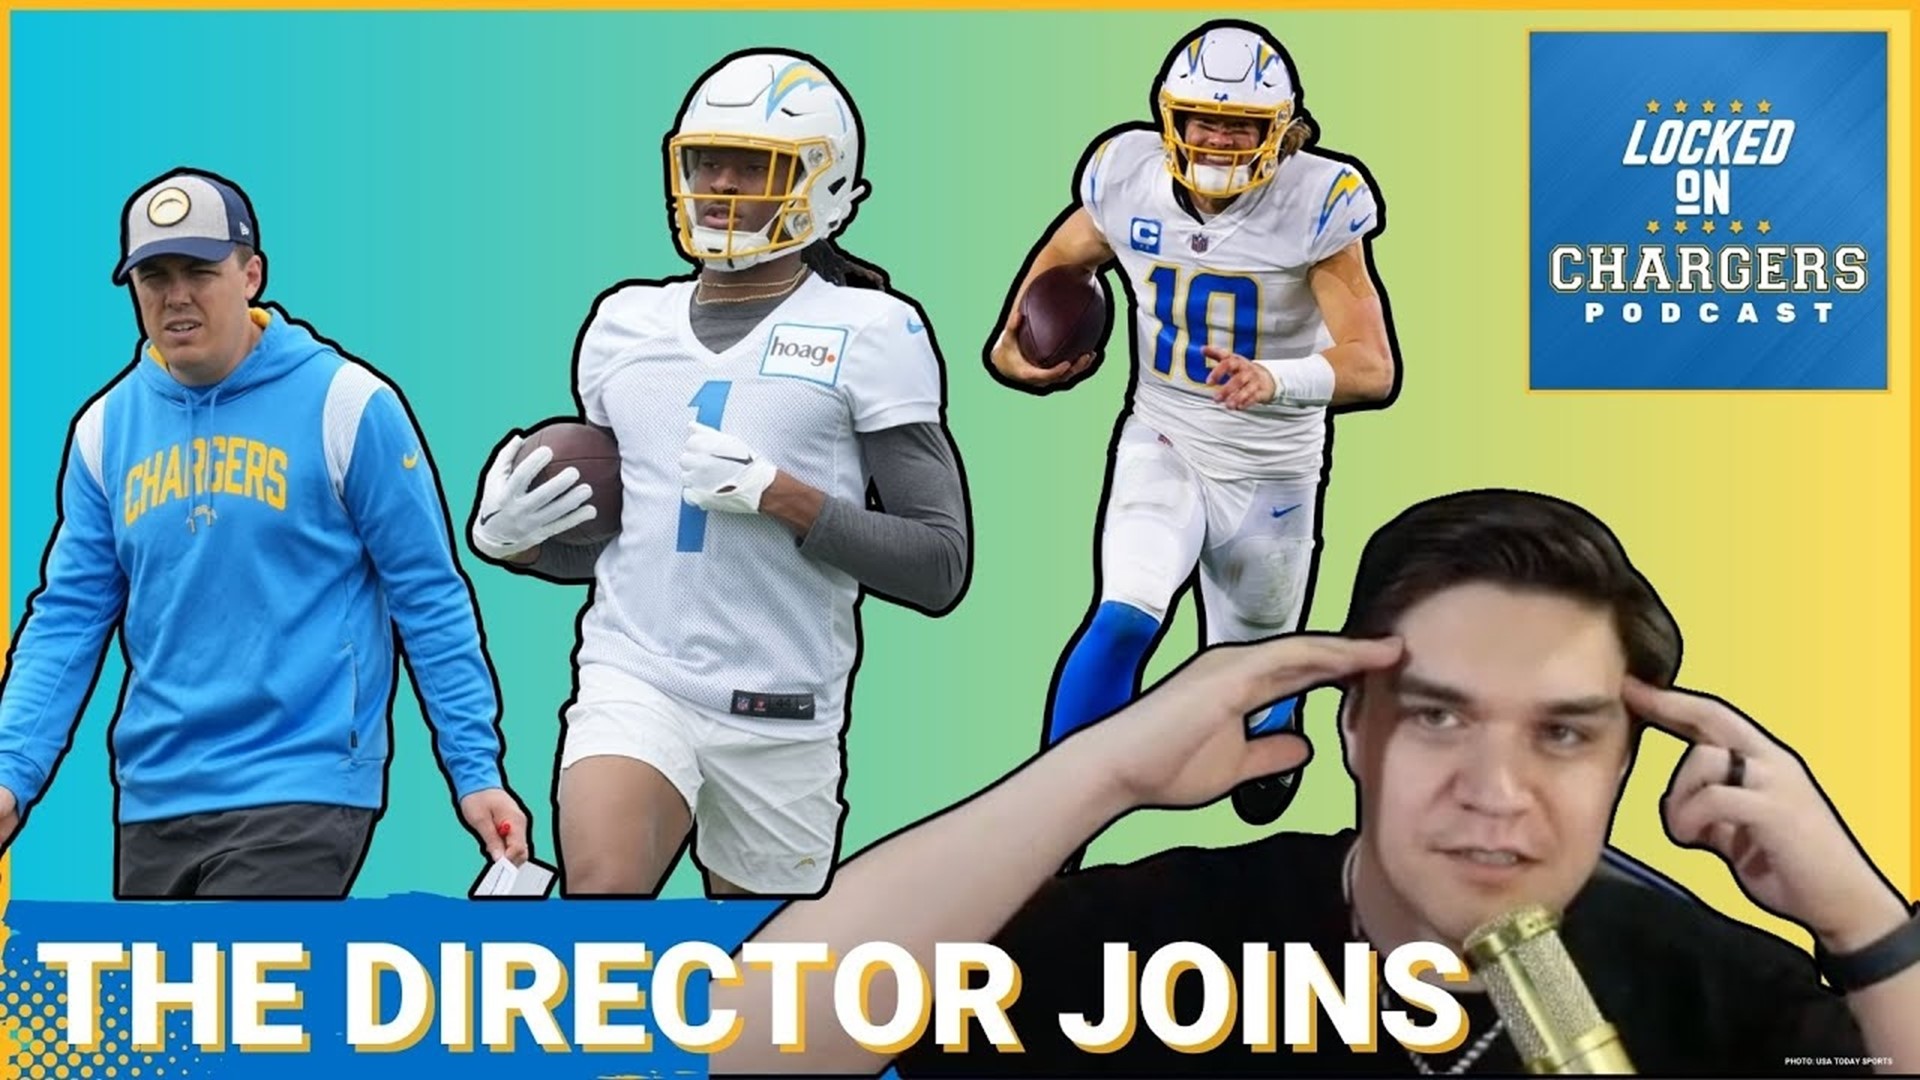 Los Angeles Chargers content creator The Director joins the show to bring some of his infectious energy and recap the biggest moments of the offseason so far.